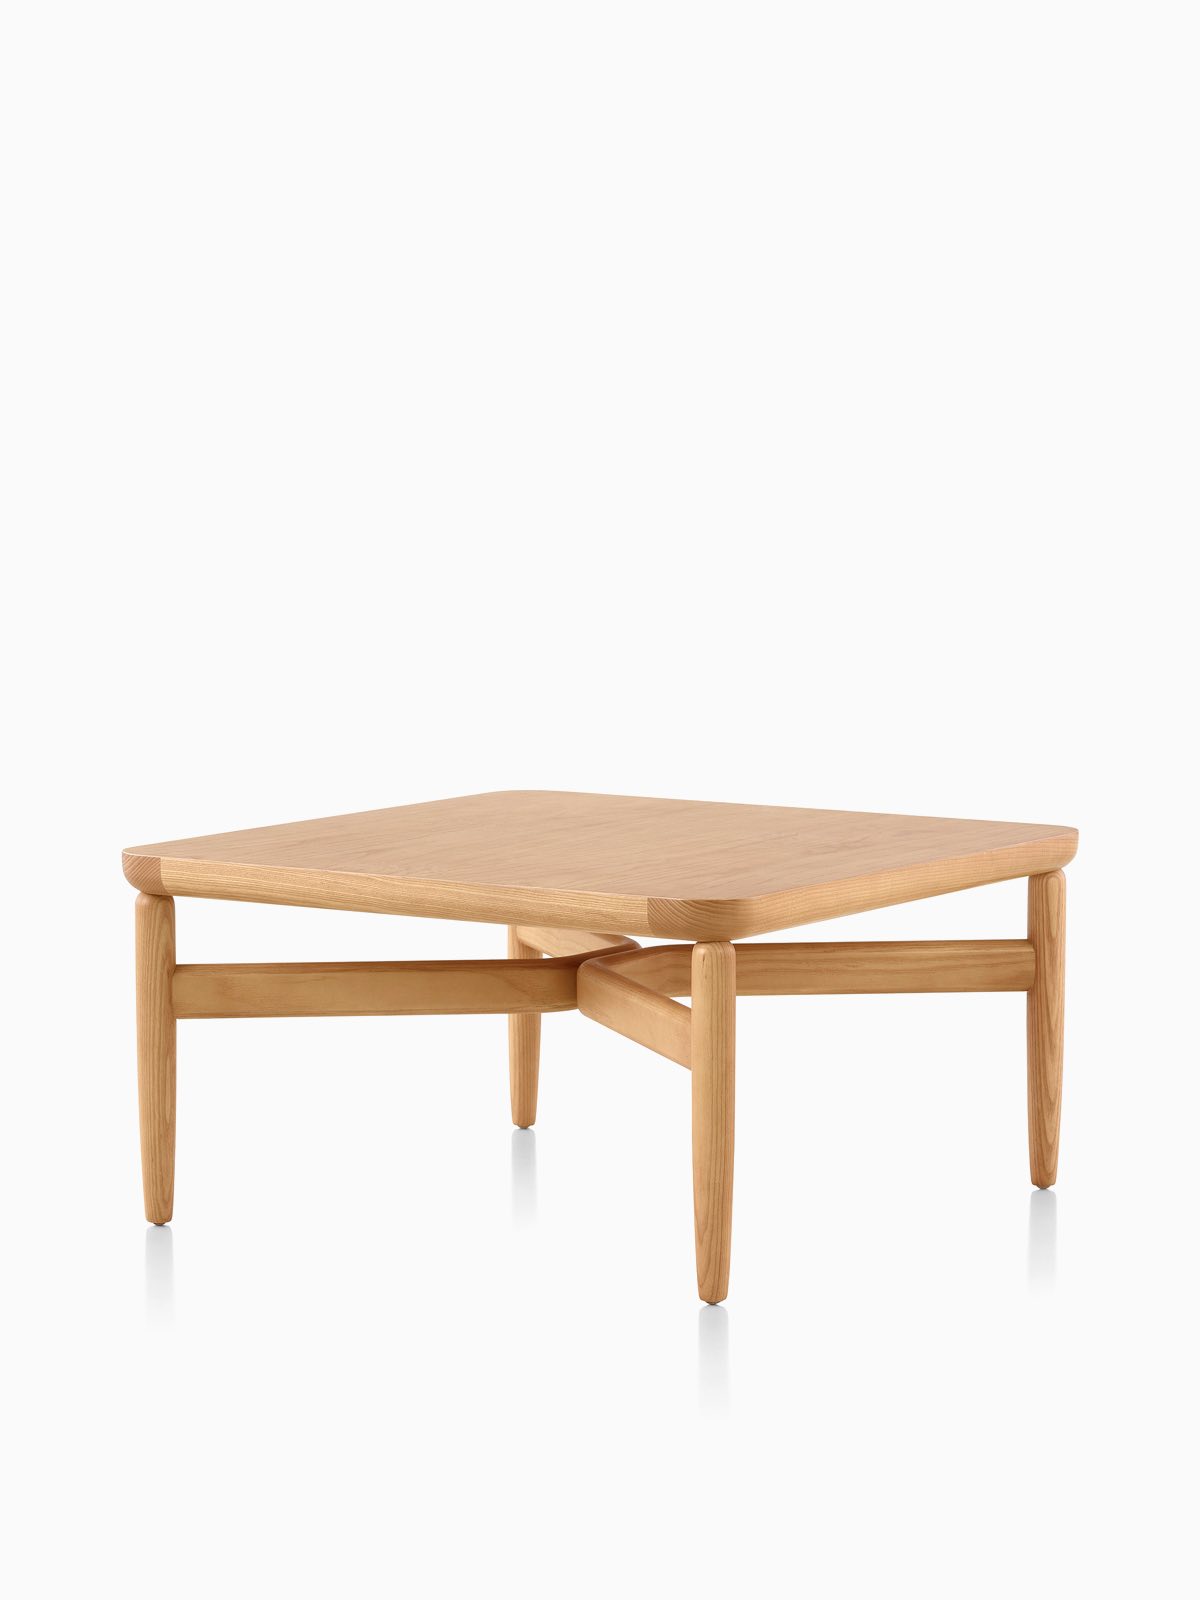 Reframe Tables